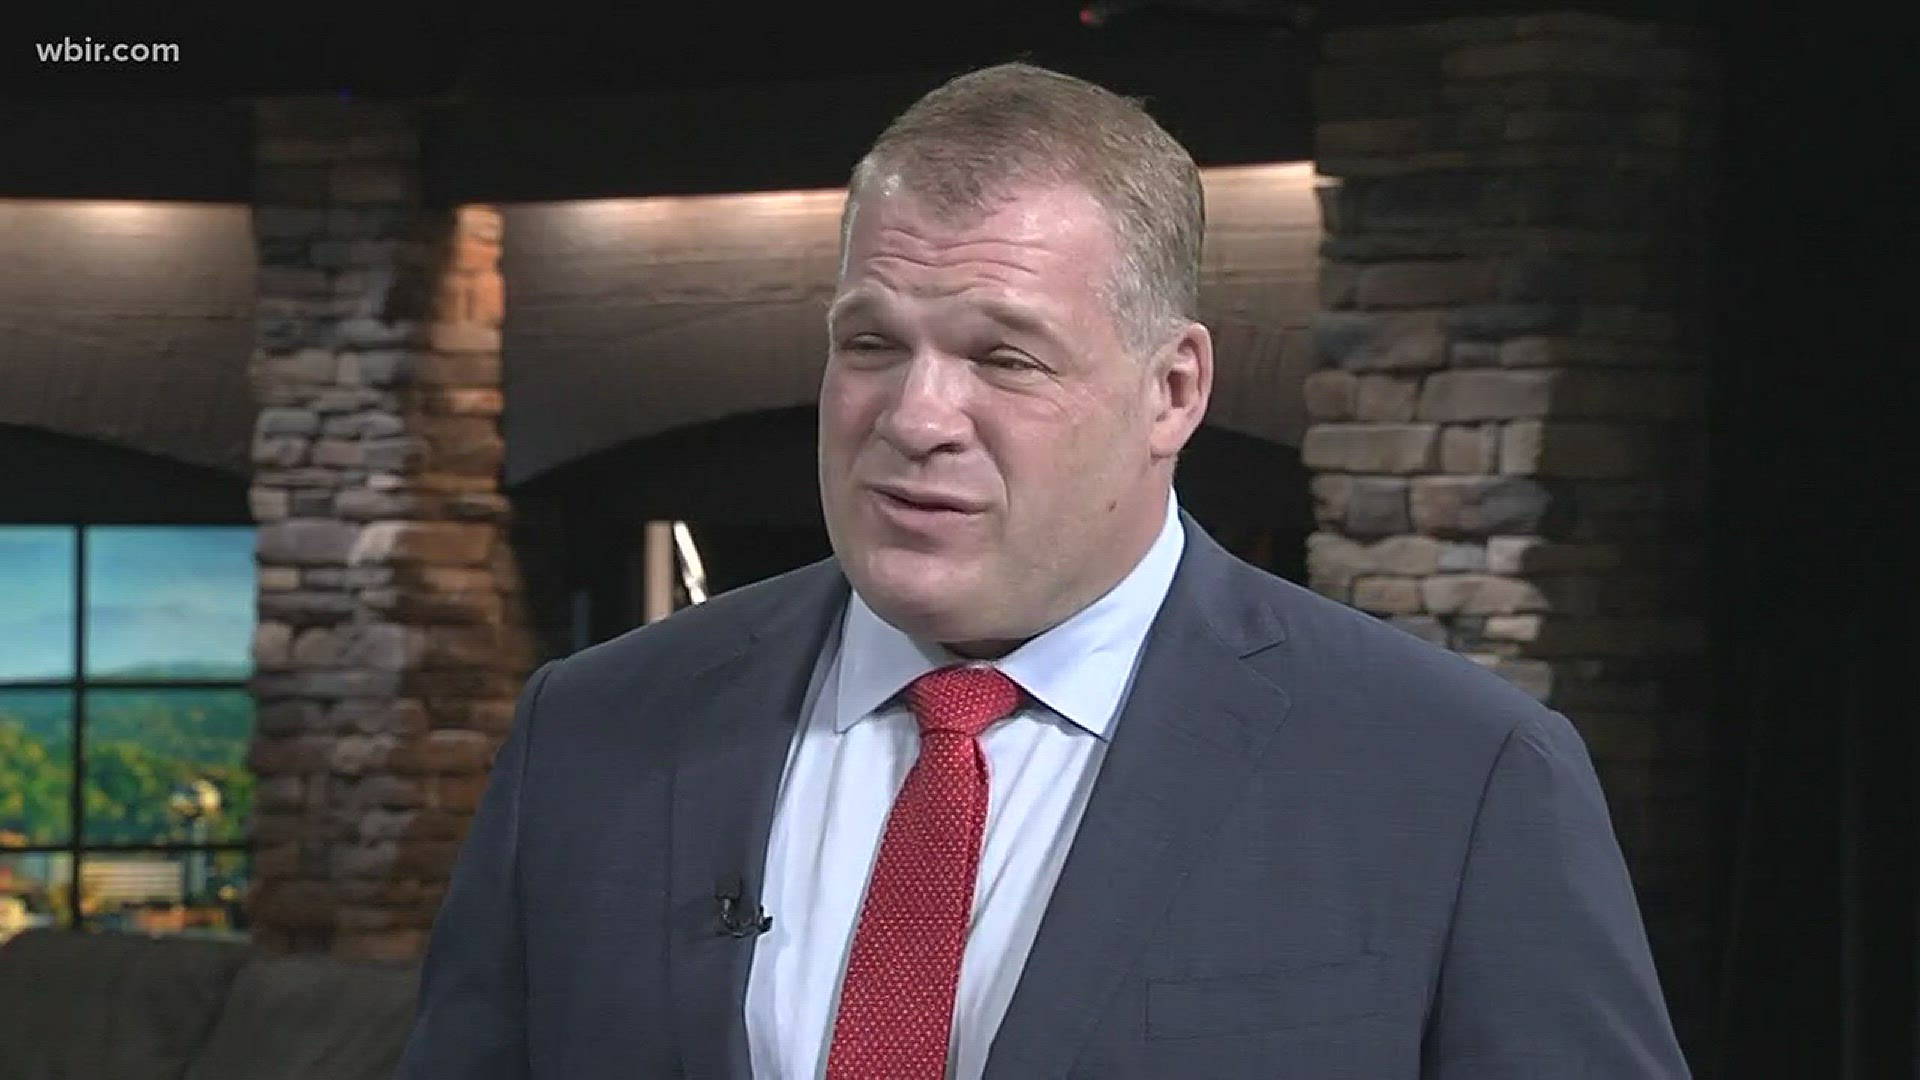 Feb. 13, 2018: Knox County mayoral candidate Glenn Jacobs discusses his campaign funding and what sets him apart from the other candidates.